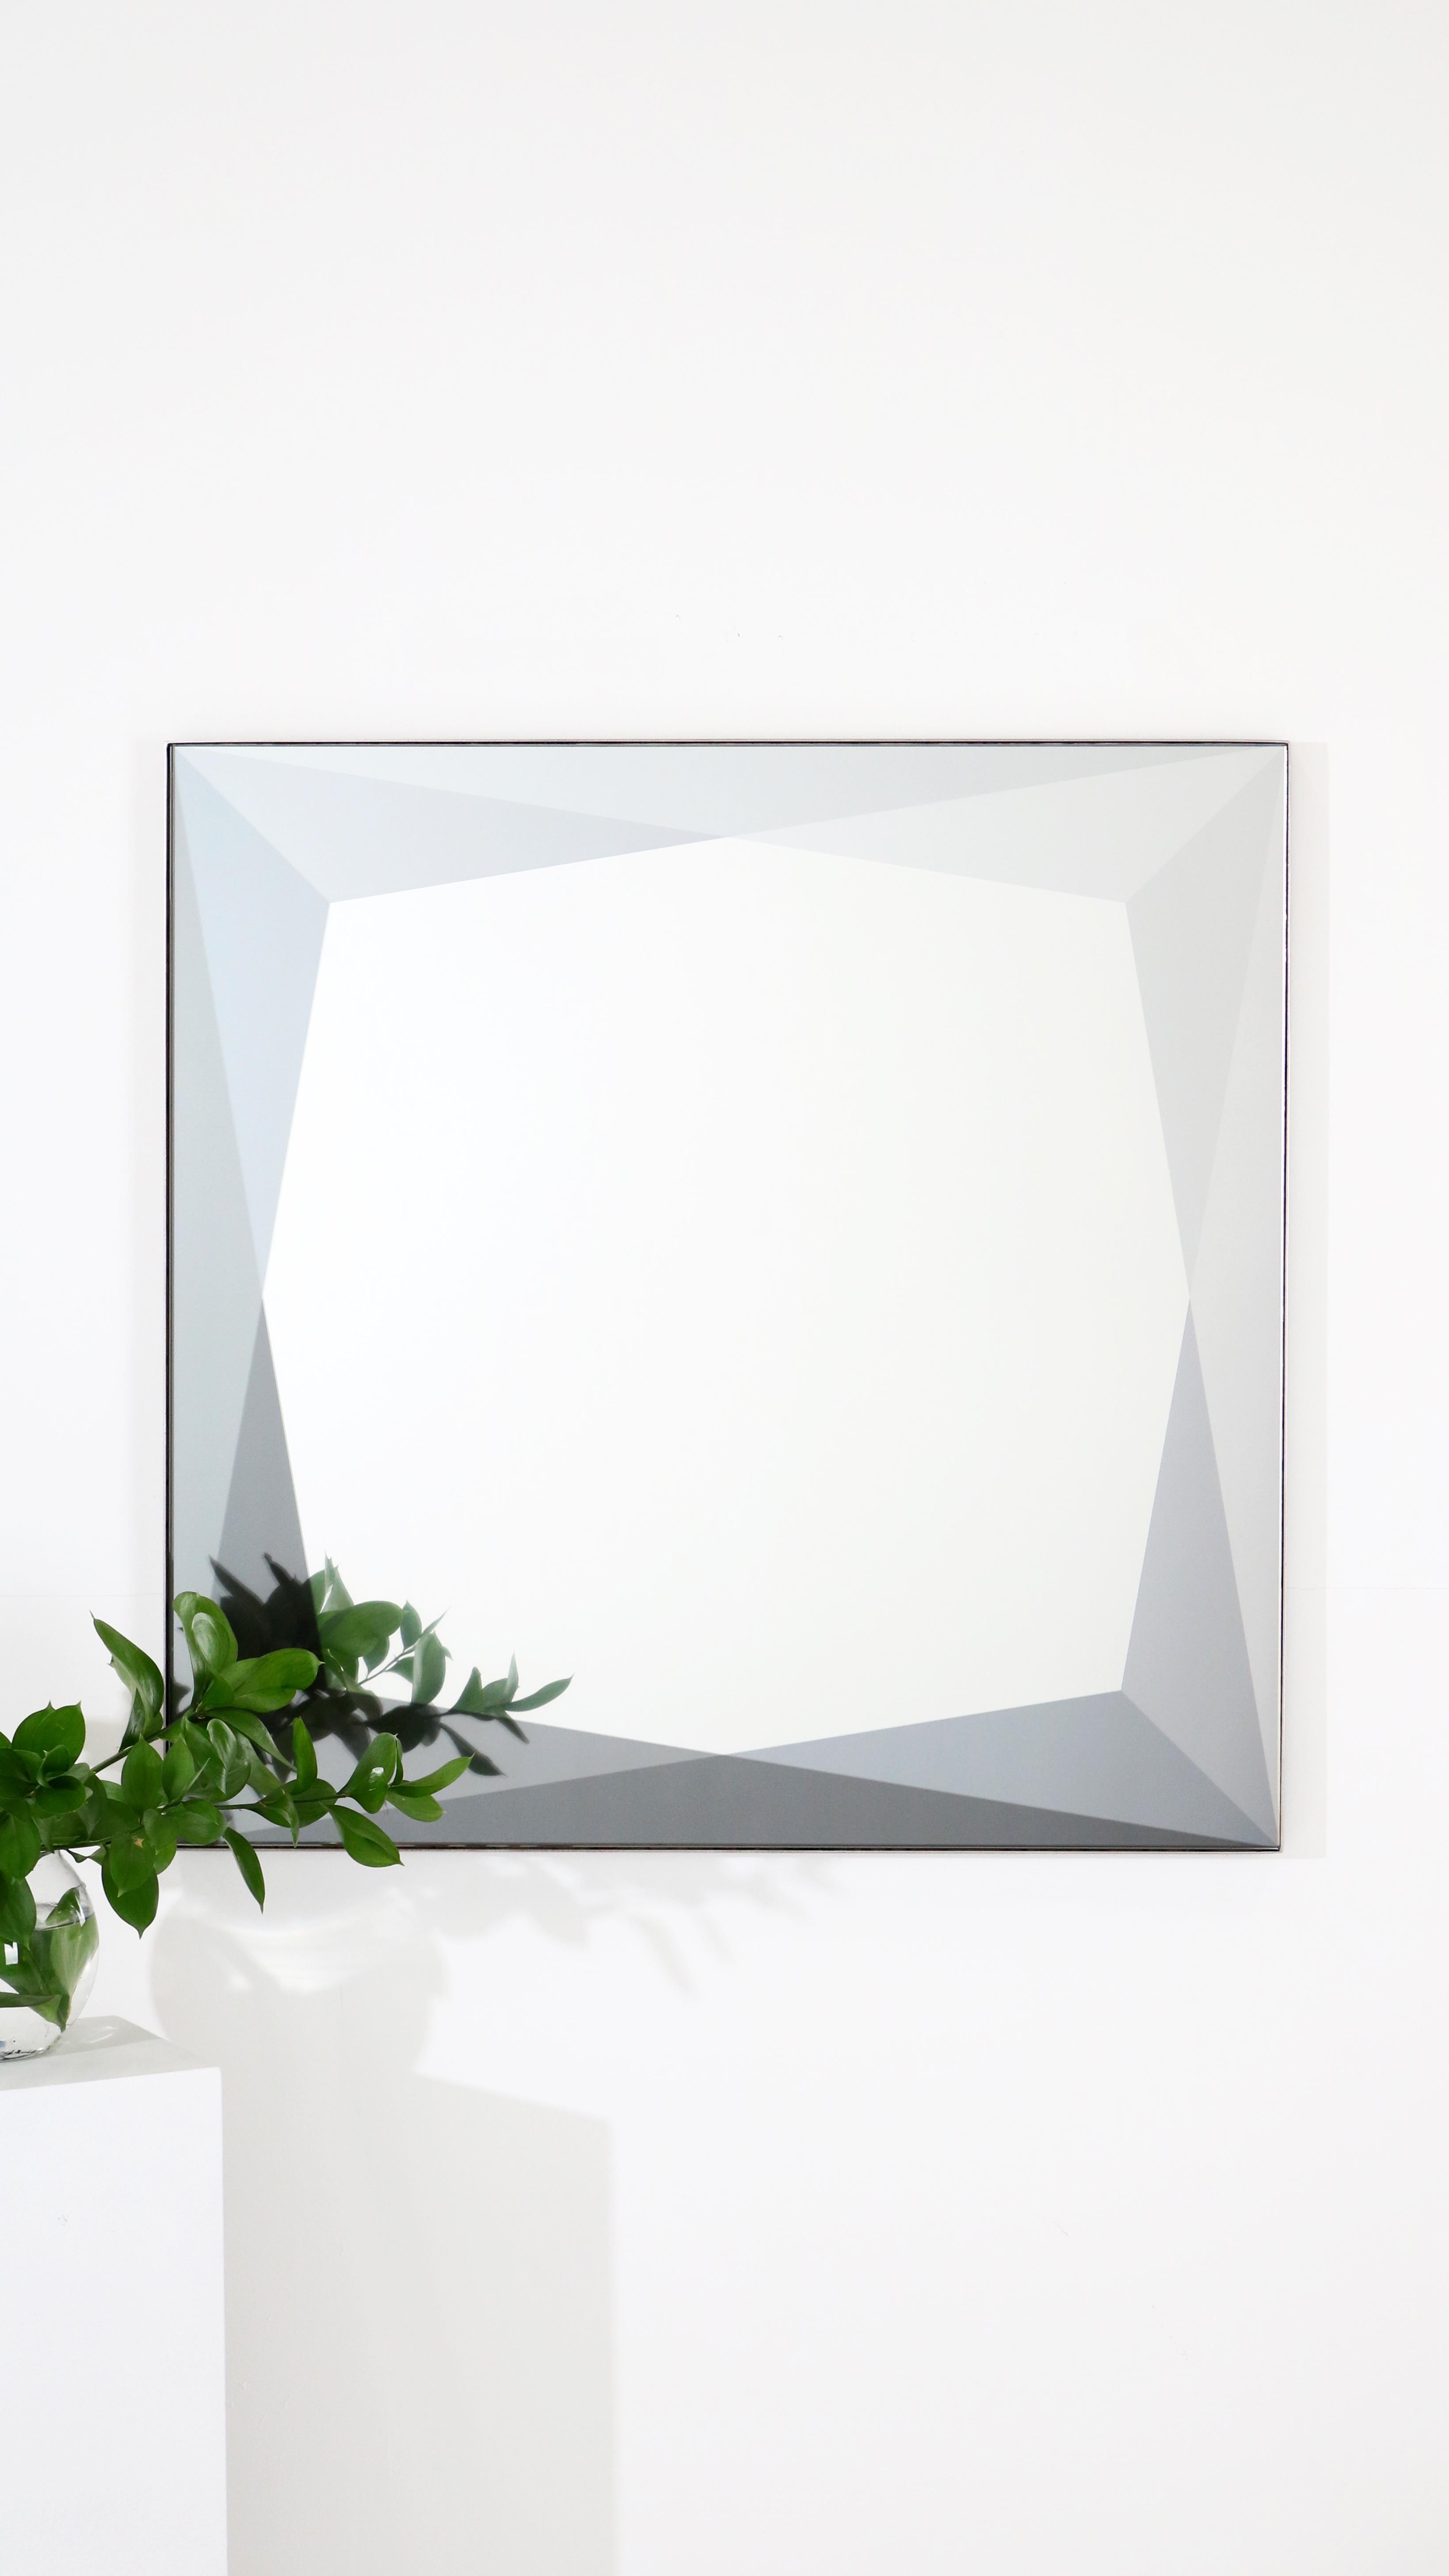 Laminated Low Iron Square Gem Mirrored Glass with Gray Gem Colorway 1